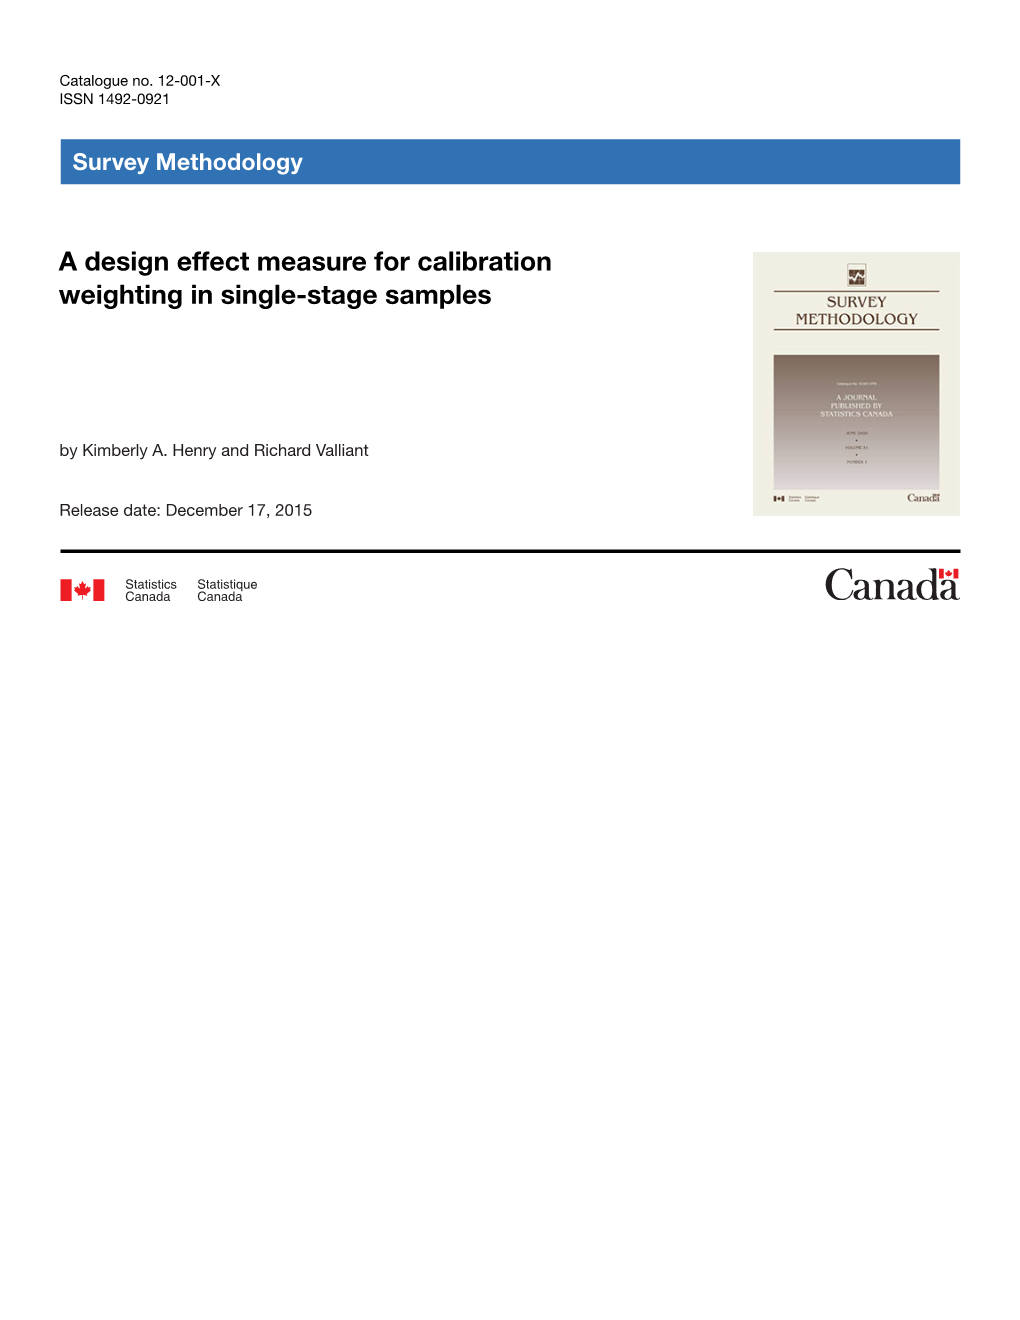 A Design Effect Measure for Calibration Weighting in Single-Stage Samples